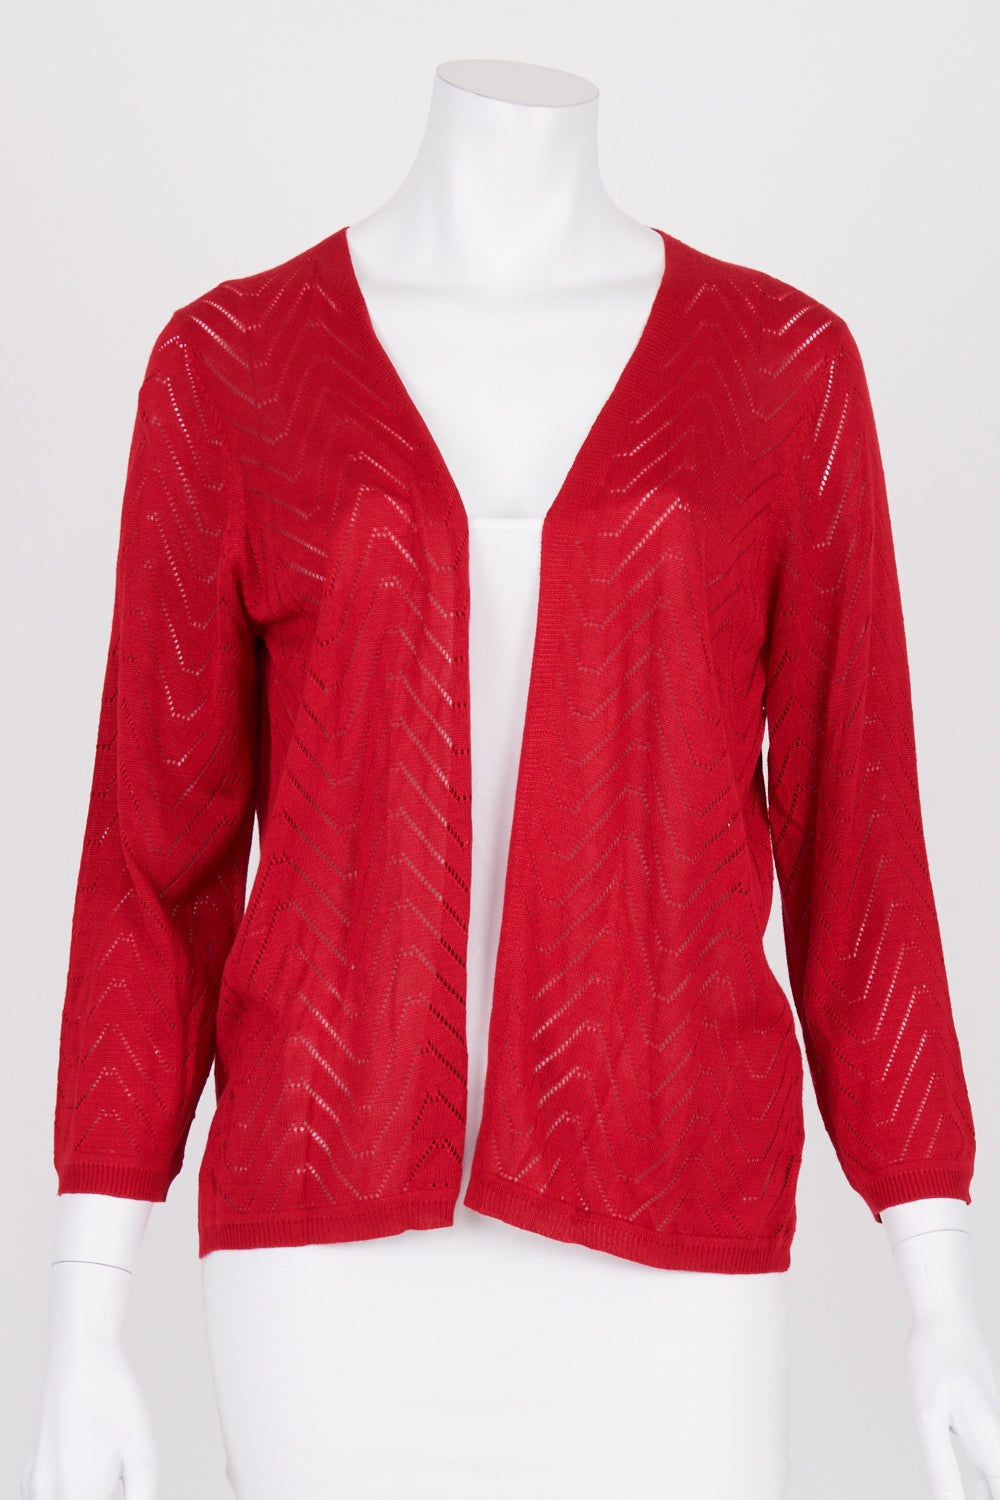 Noni B Red Open Front Cardigan S